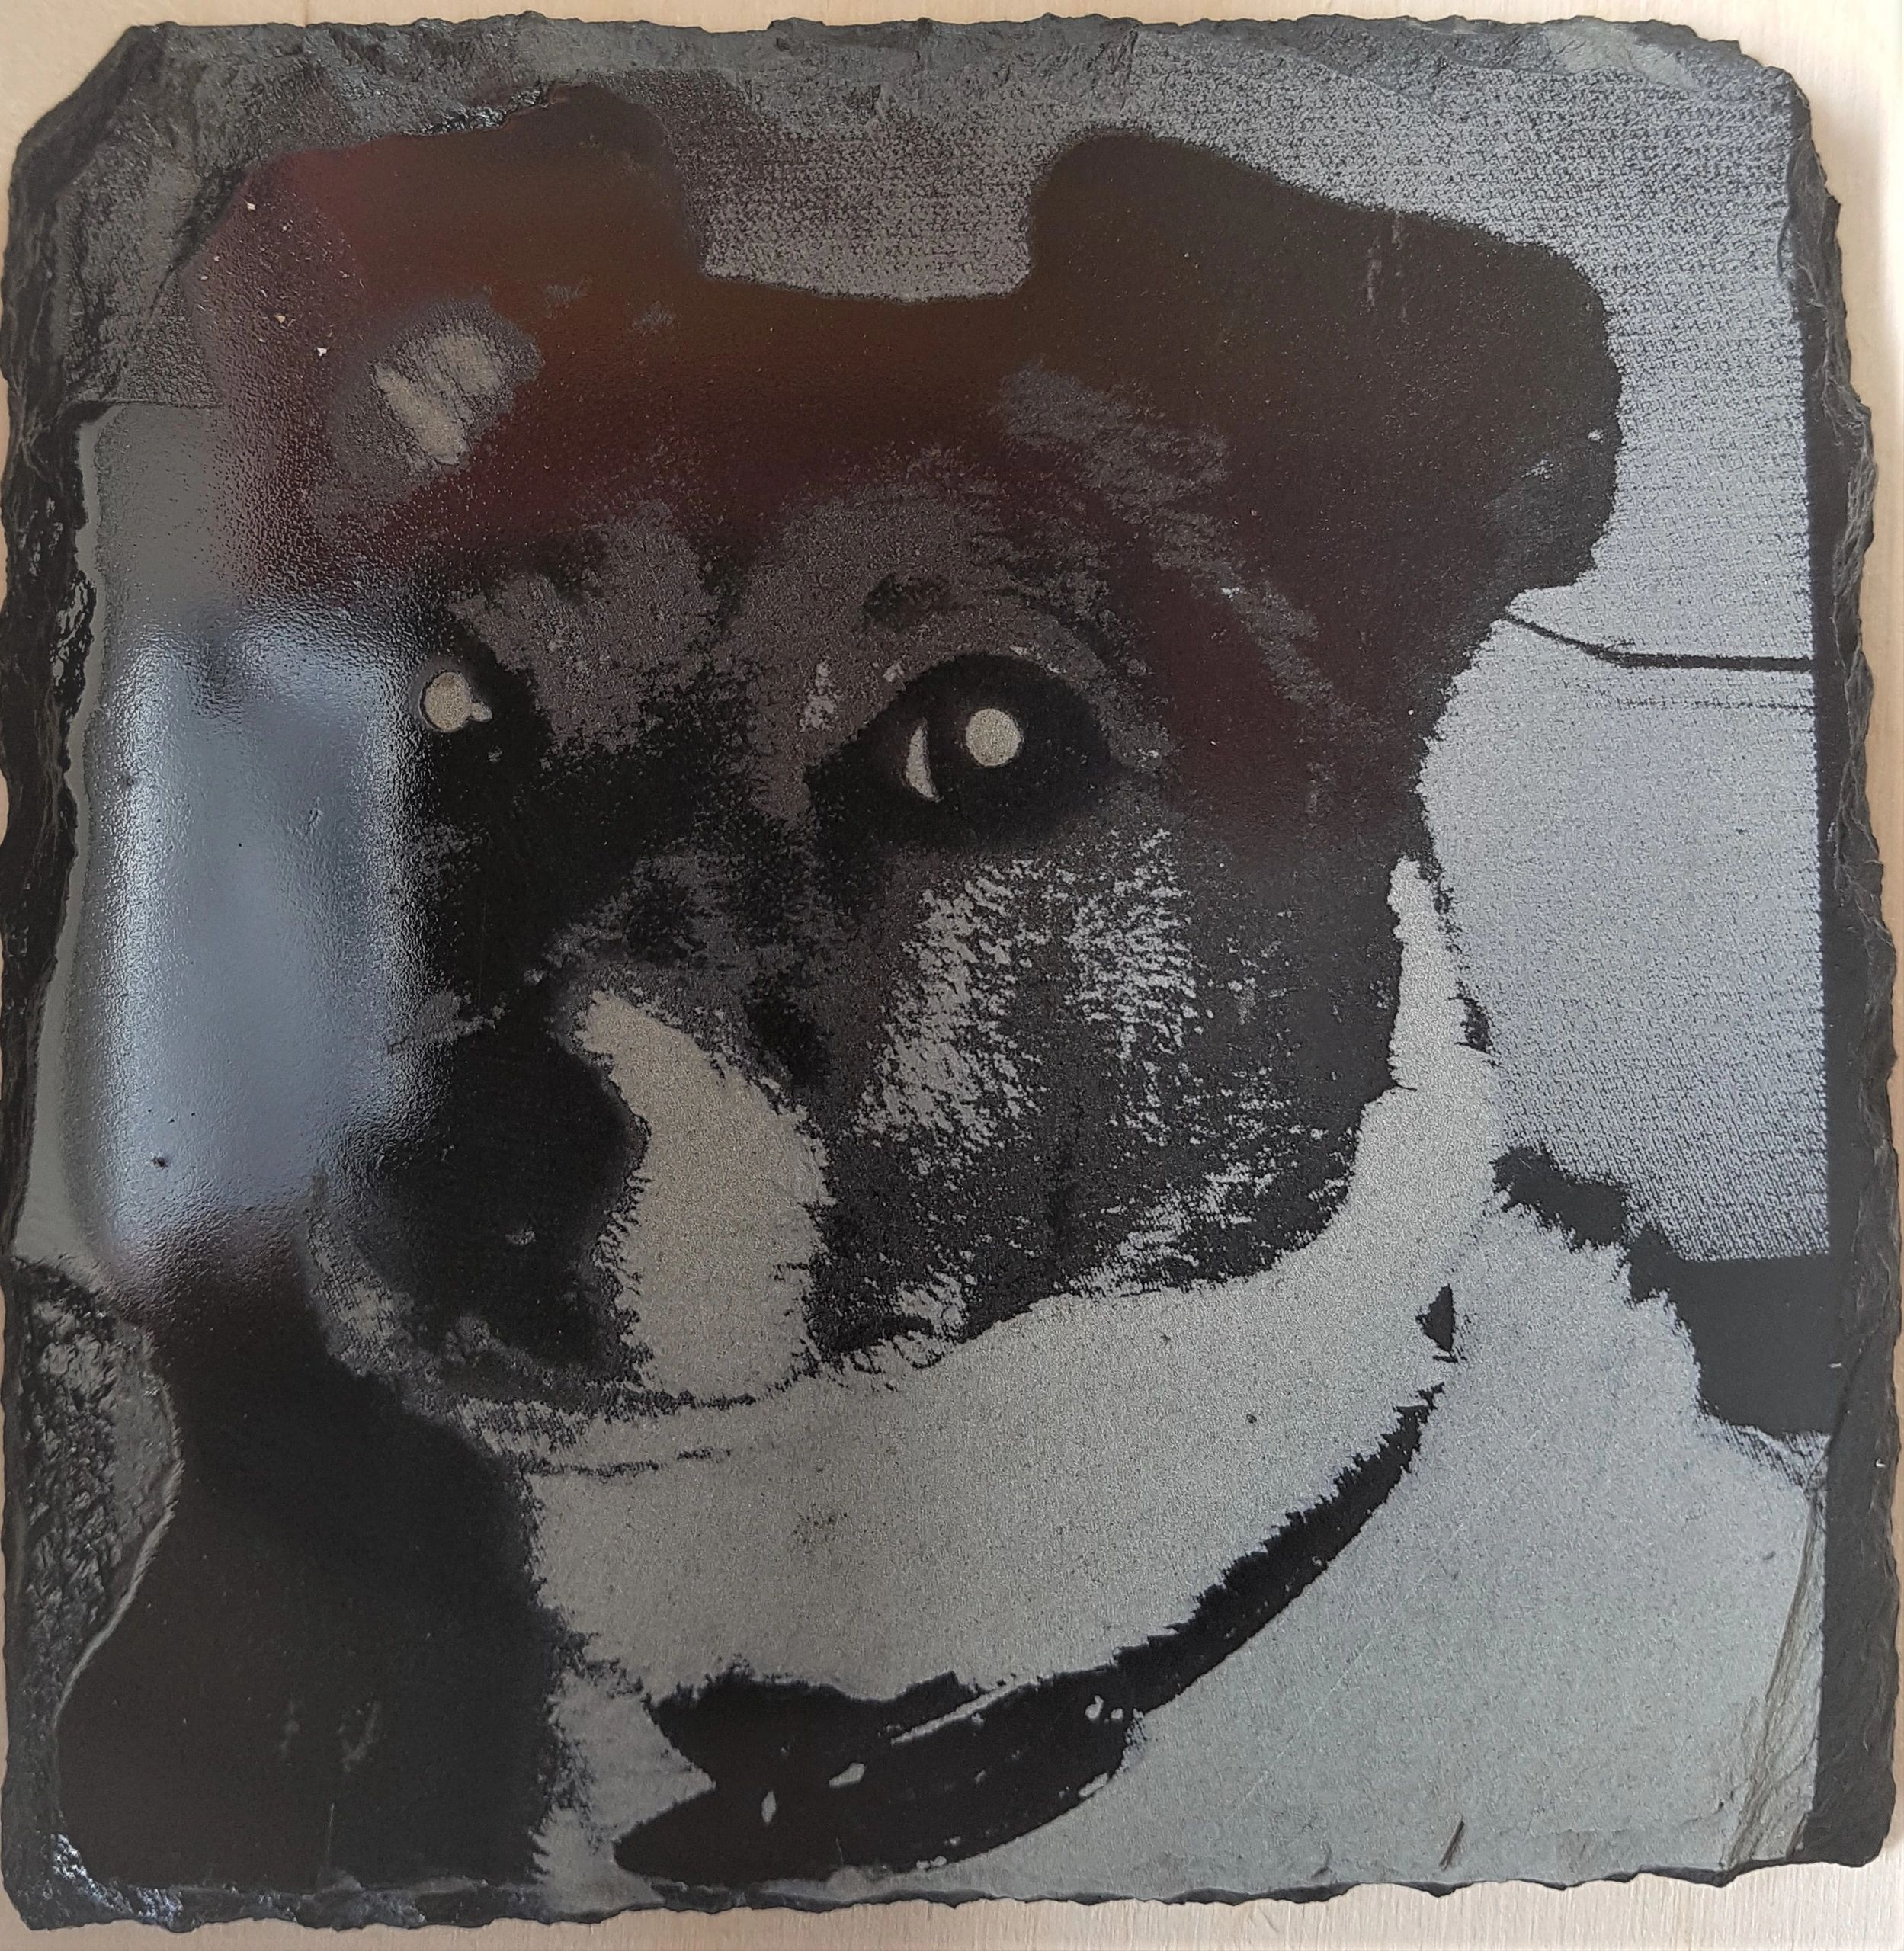 Photograph on slate using a laser